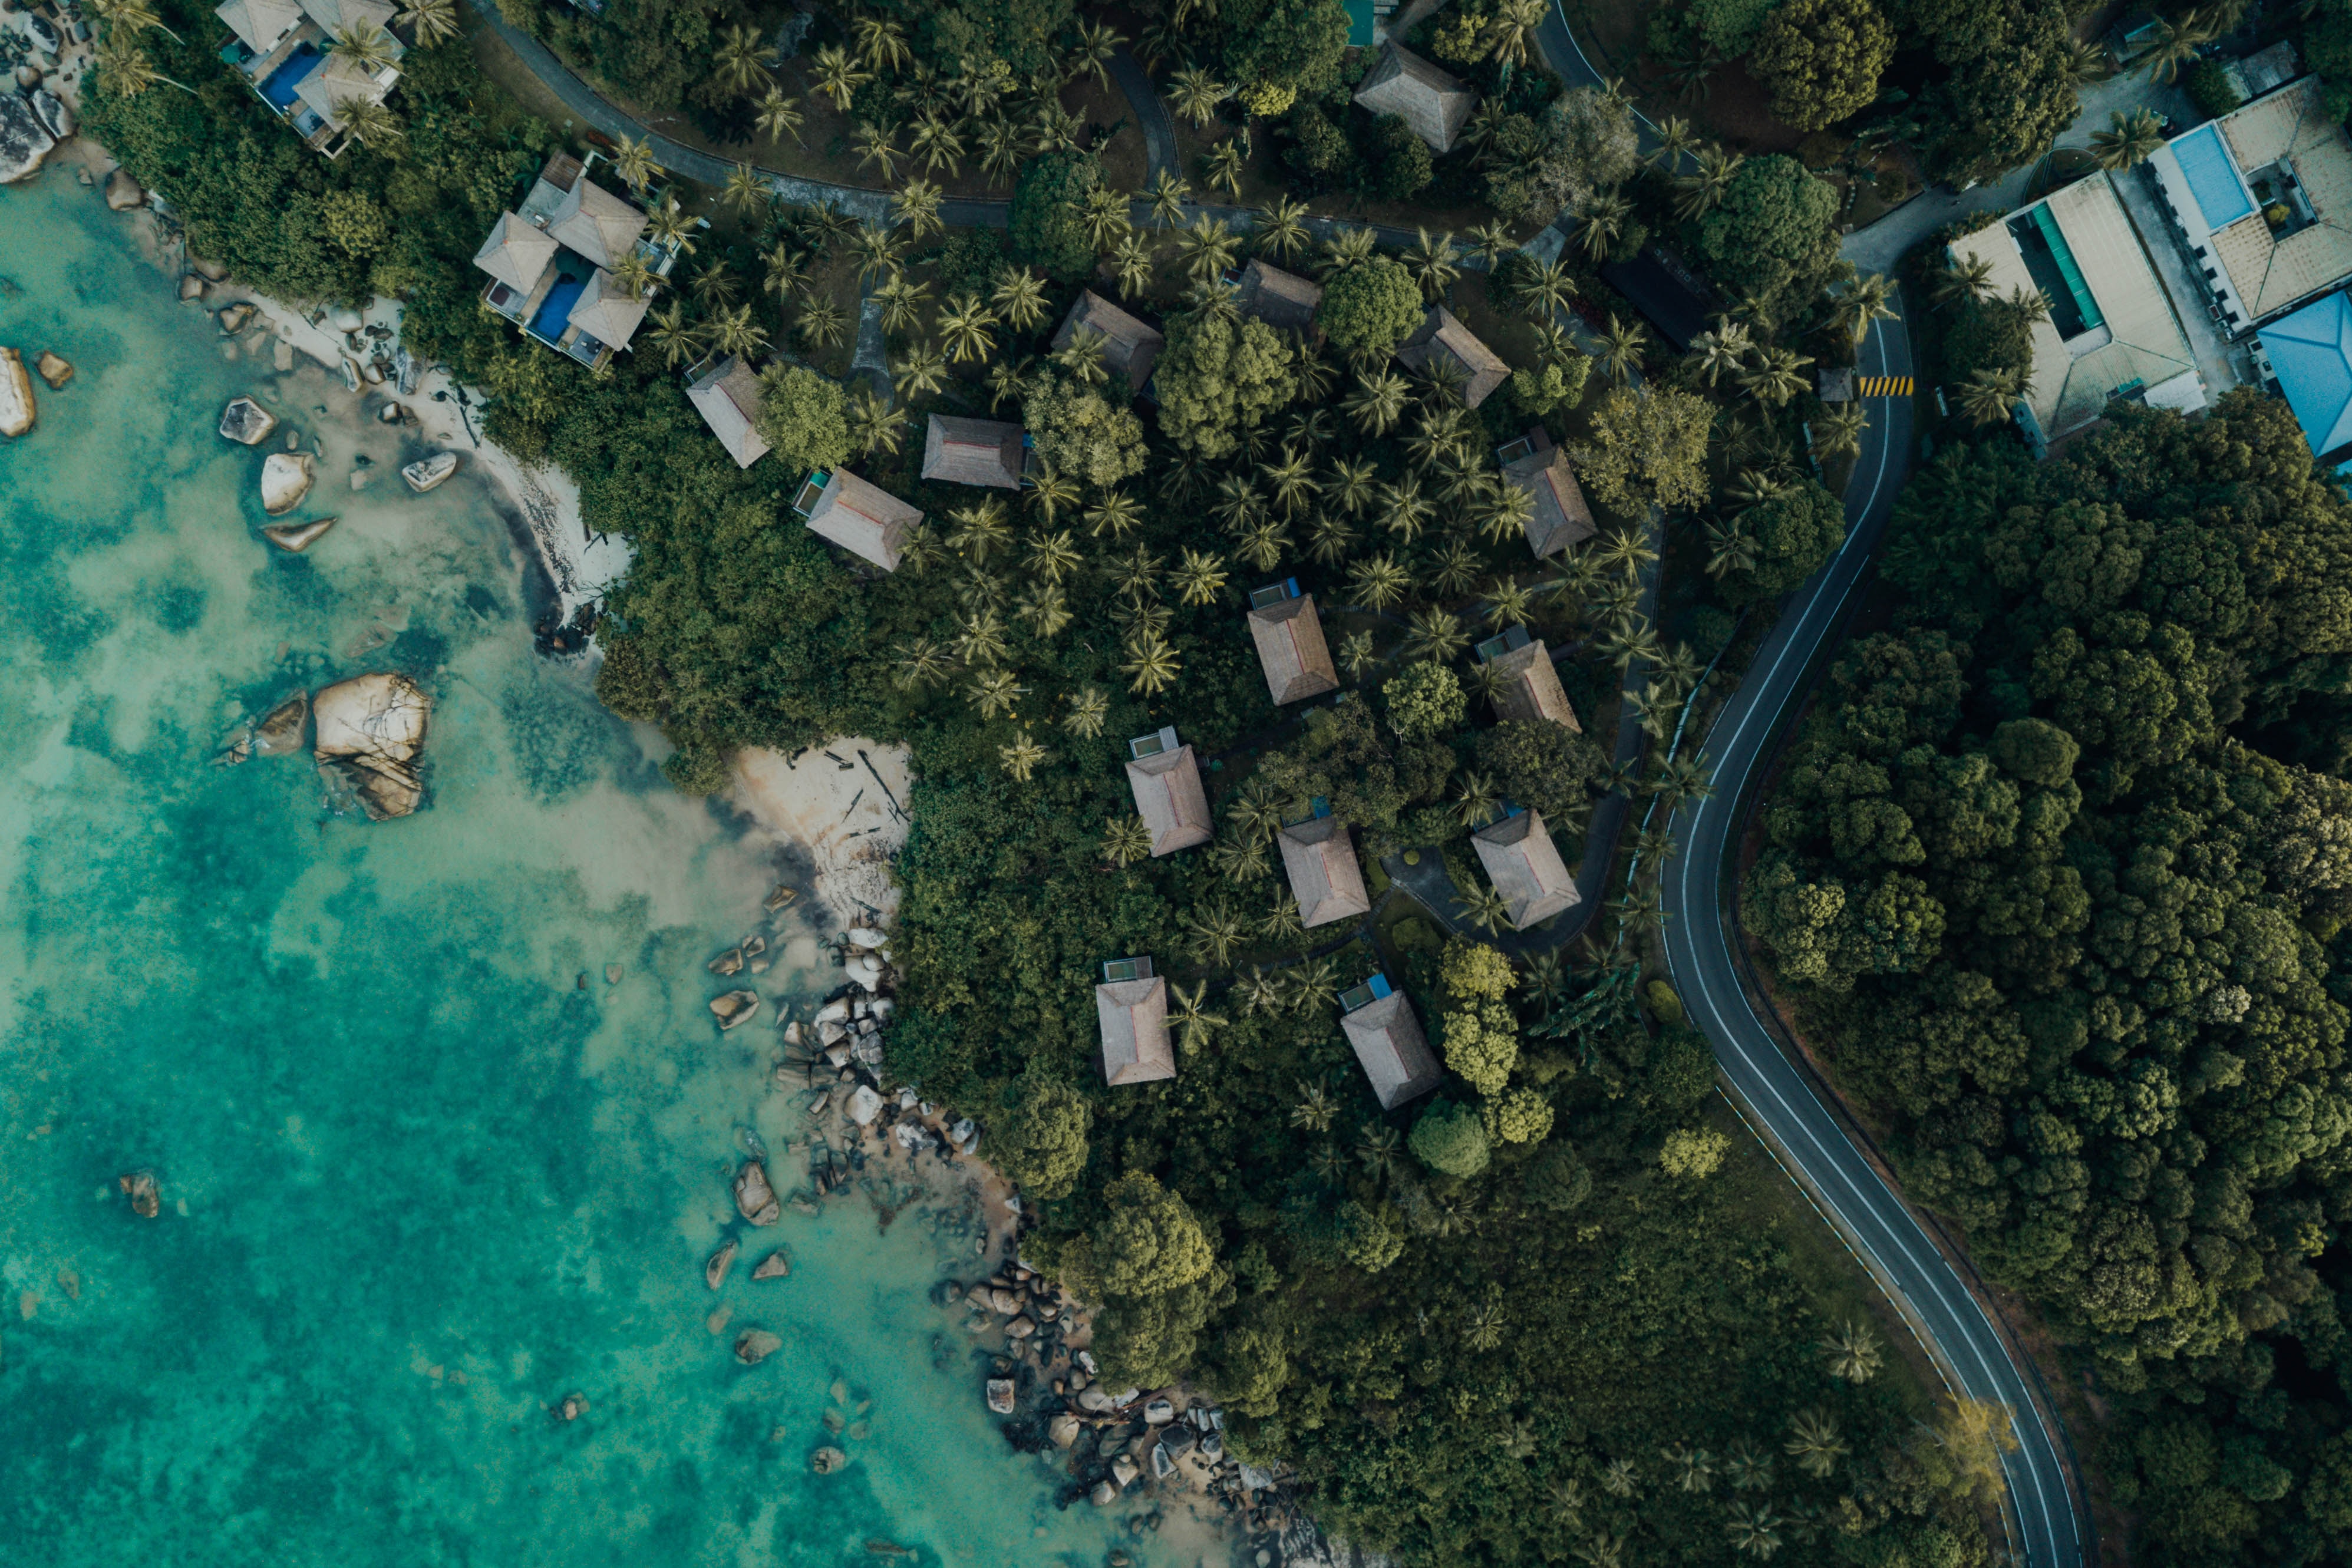 view from above, nature, trees, sea, building, shore, bank 1080p